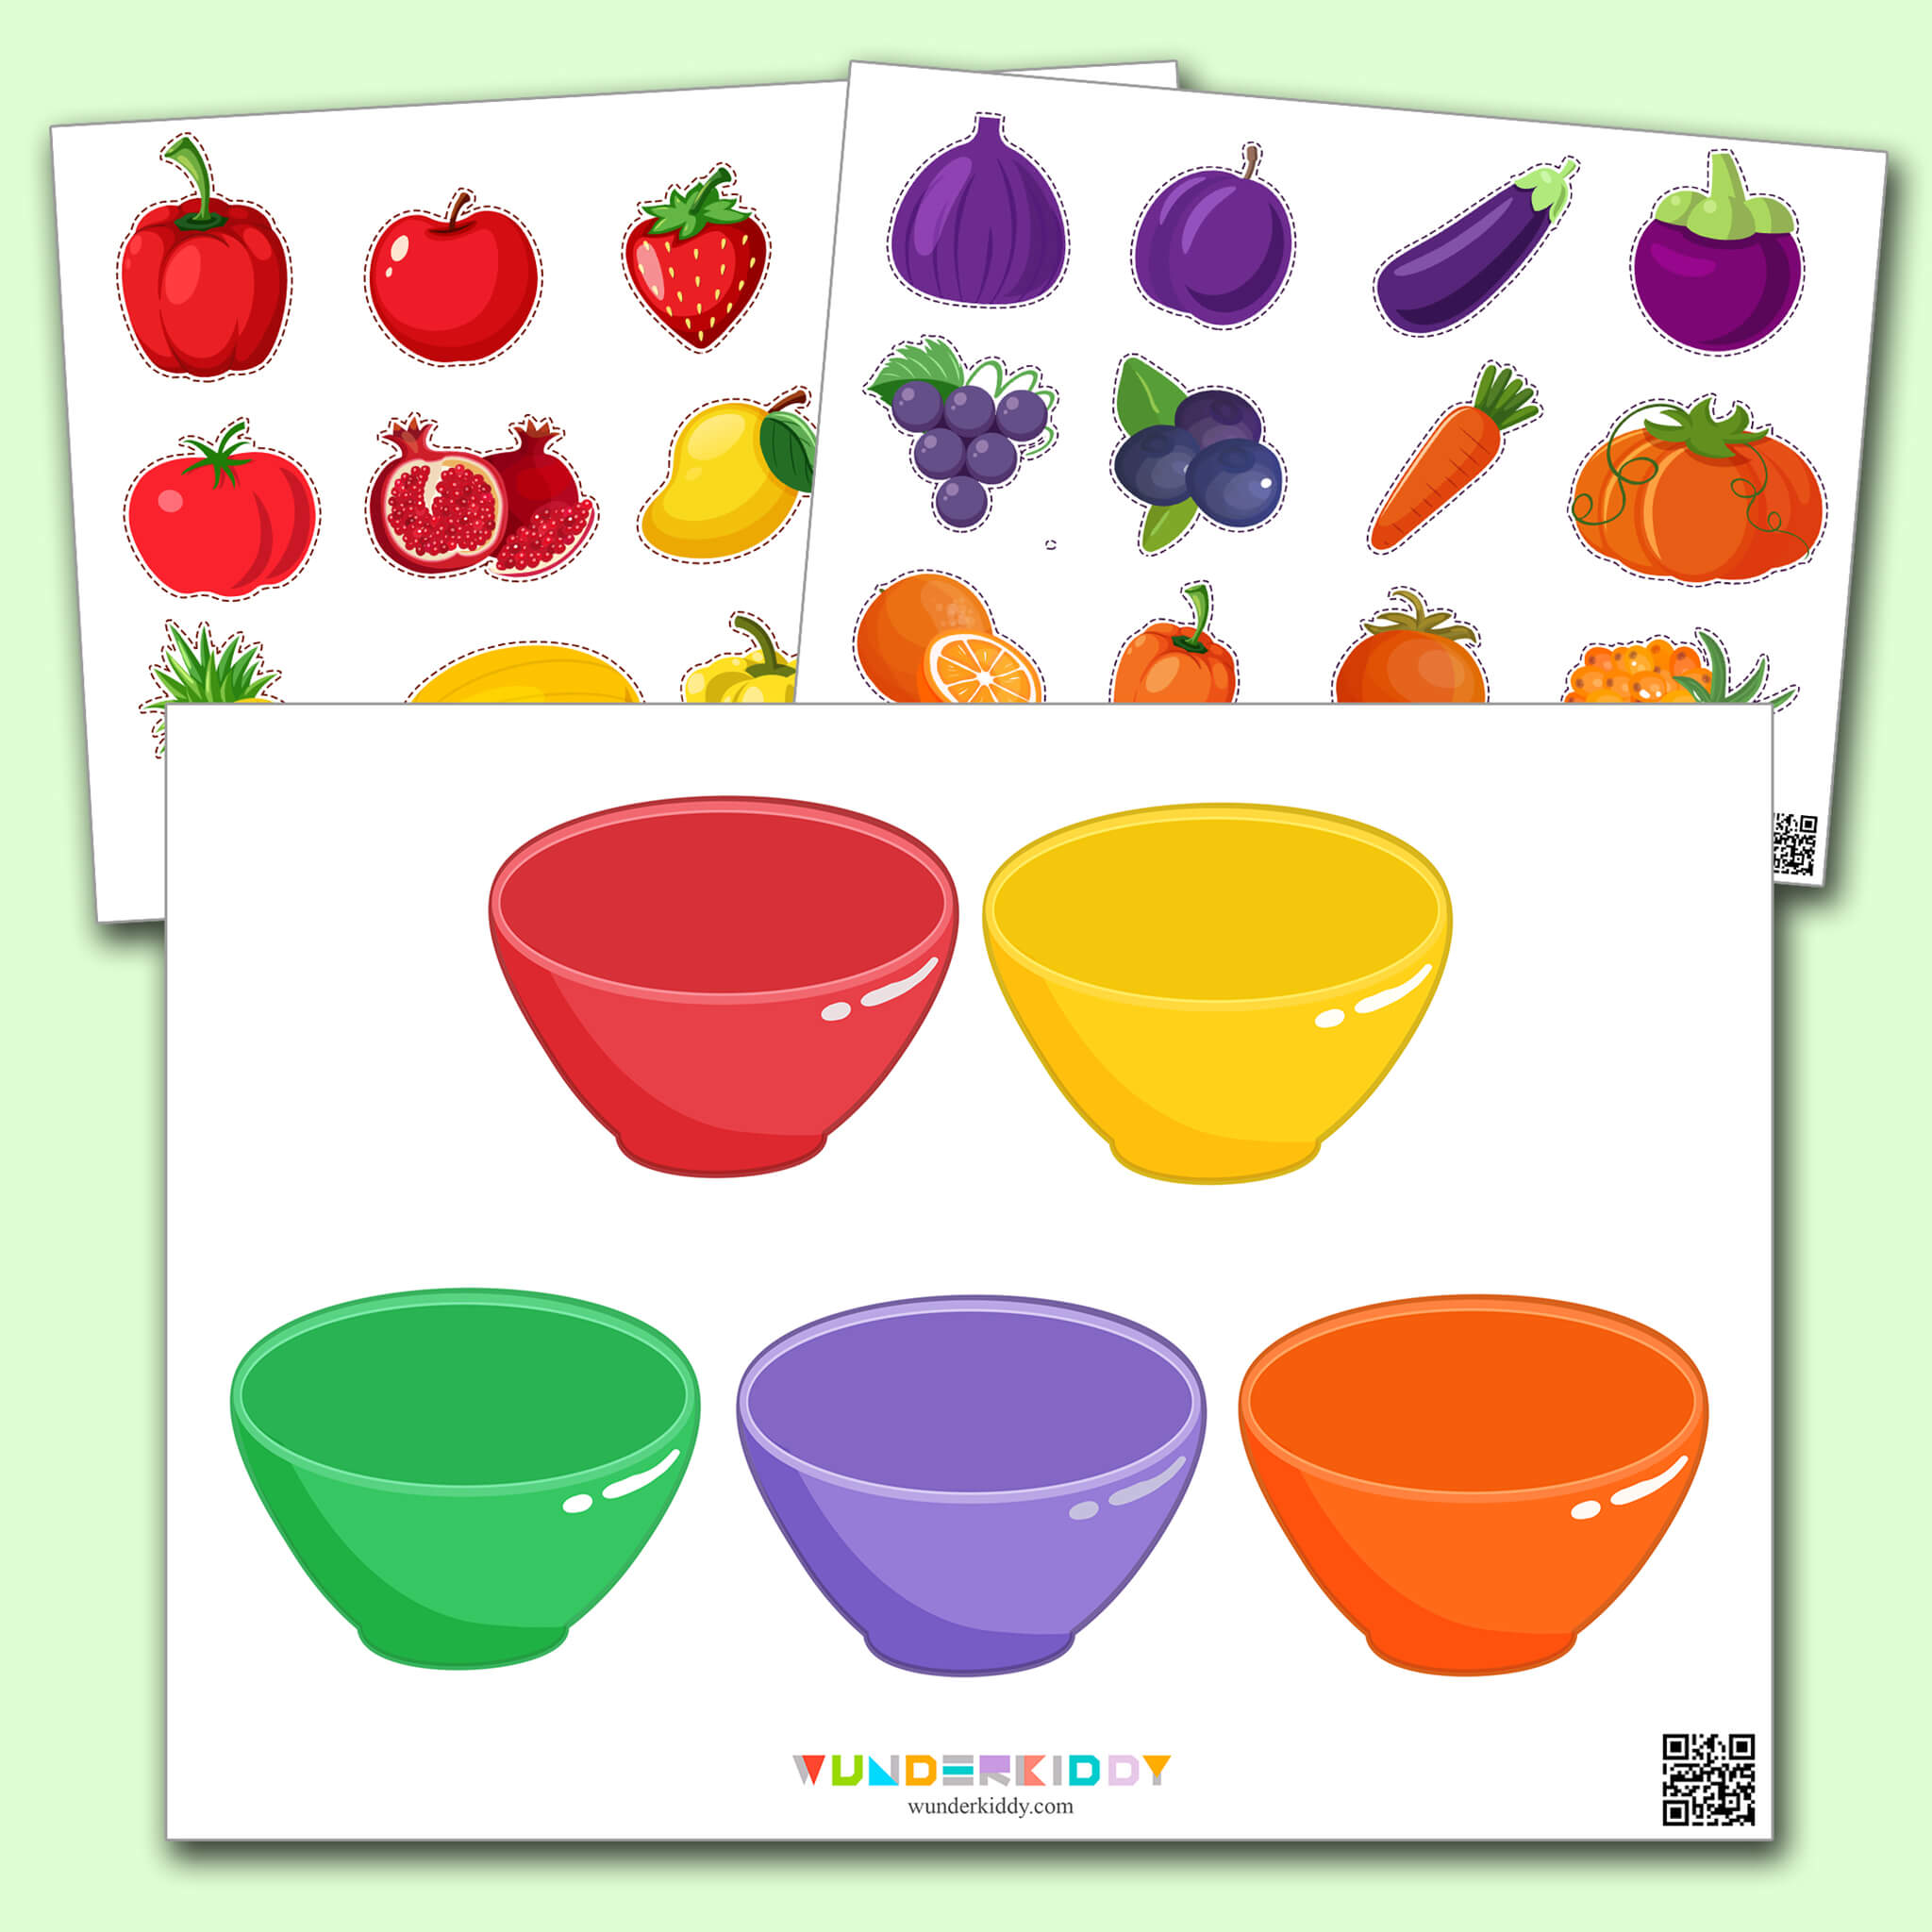 Worksheets Sorting By Colors Bowls of Vegetables and Fruits